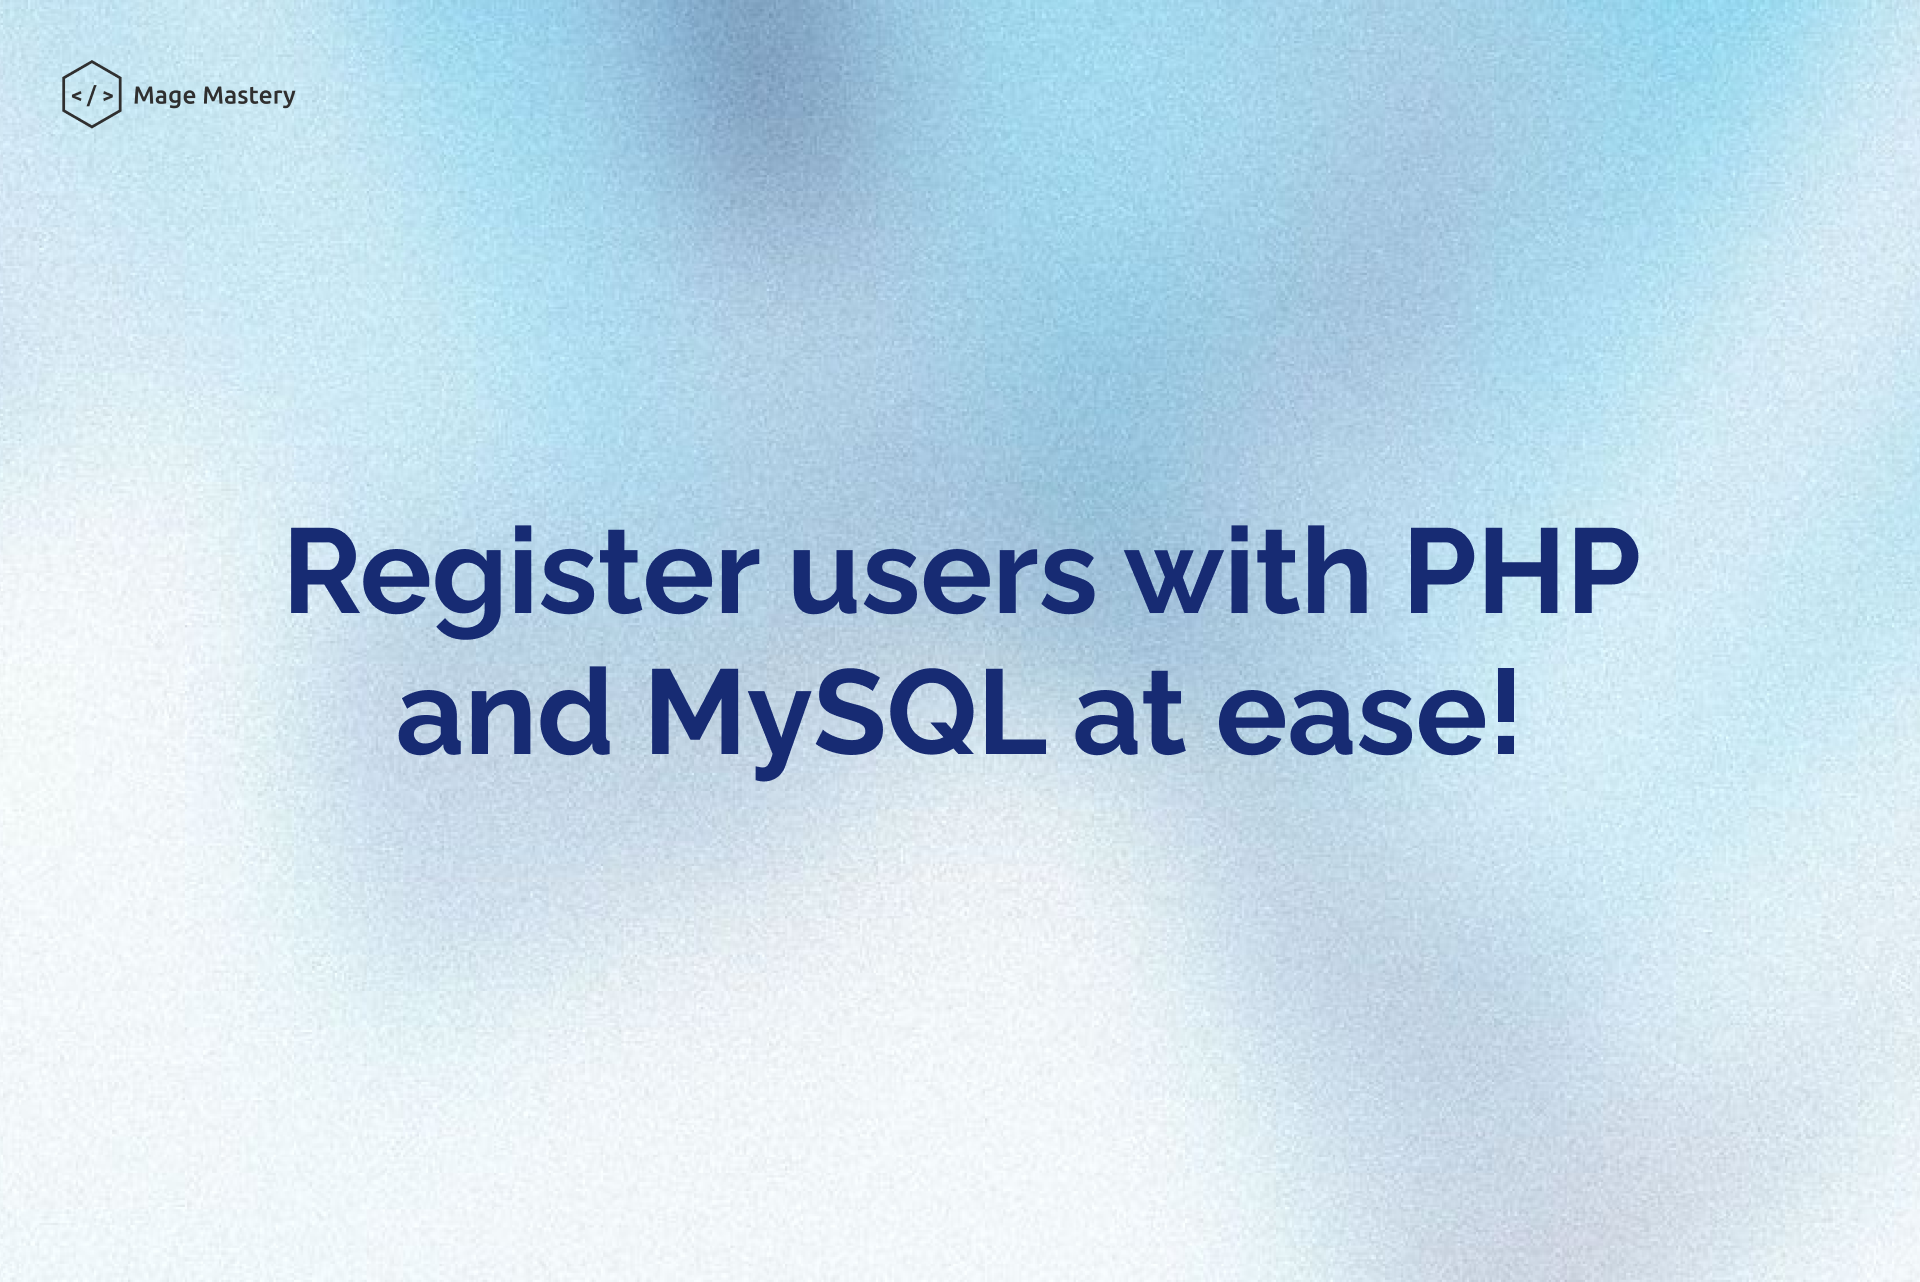 How to register users with PHP and MySQL?